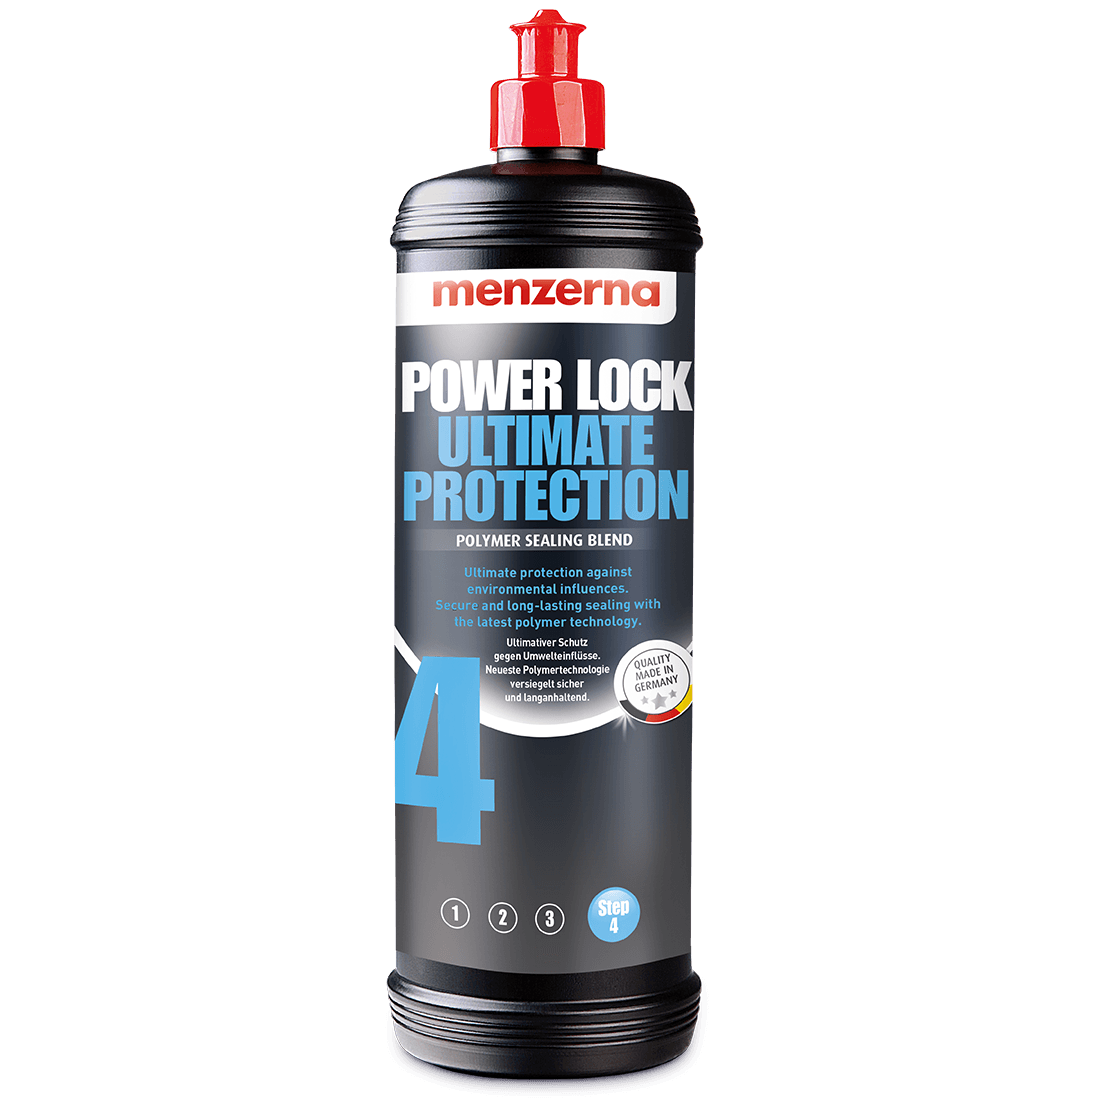 Menzerna: Power Lock Ultimate Protection